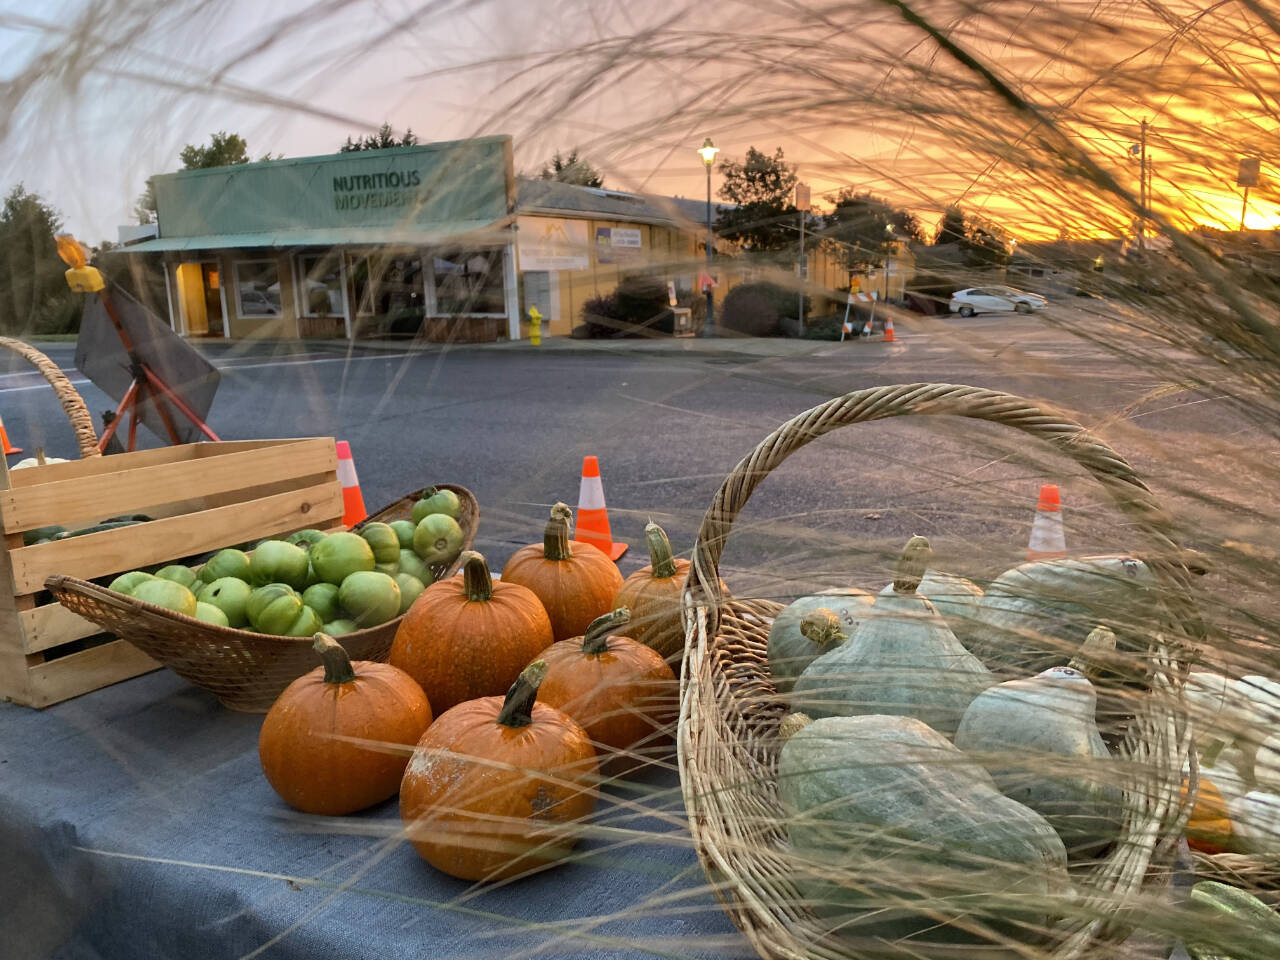 Photo courtesy of Sequim Farmers & Artisans Market
The Sequim Farmers & Artisans Market hosts its November Winter Market festivities from 10 a.m.-2 p.m. on Saturday, Nov. 18, at the Sequim Civic Center.